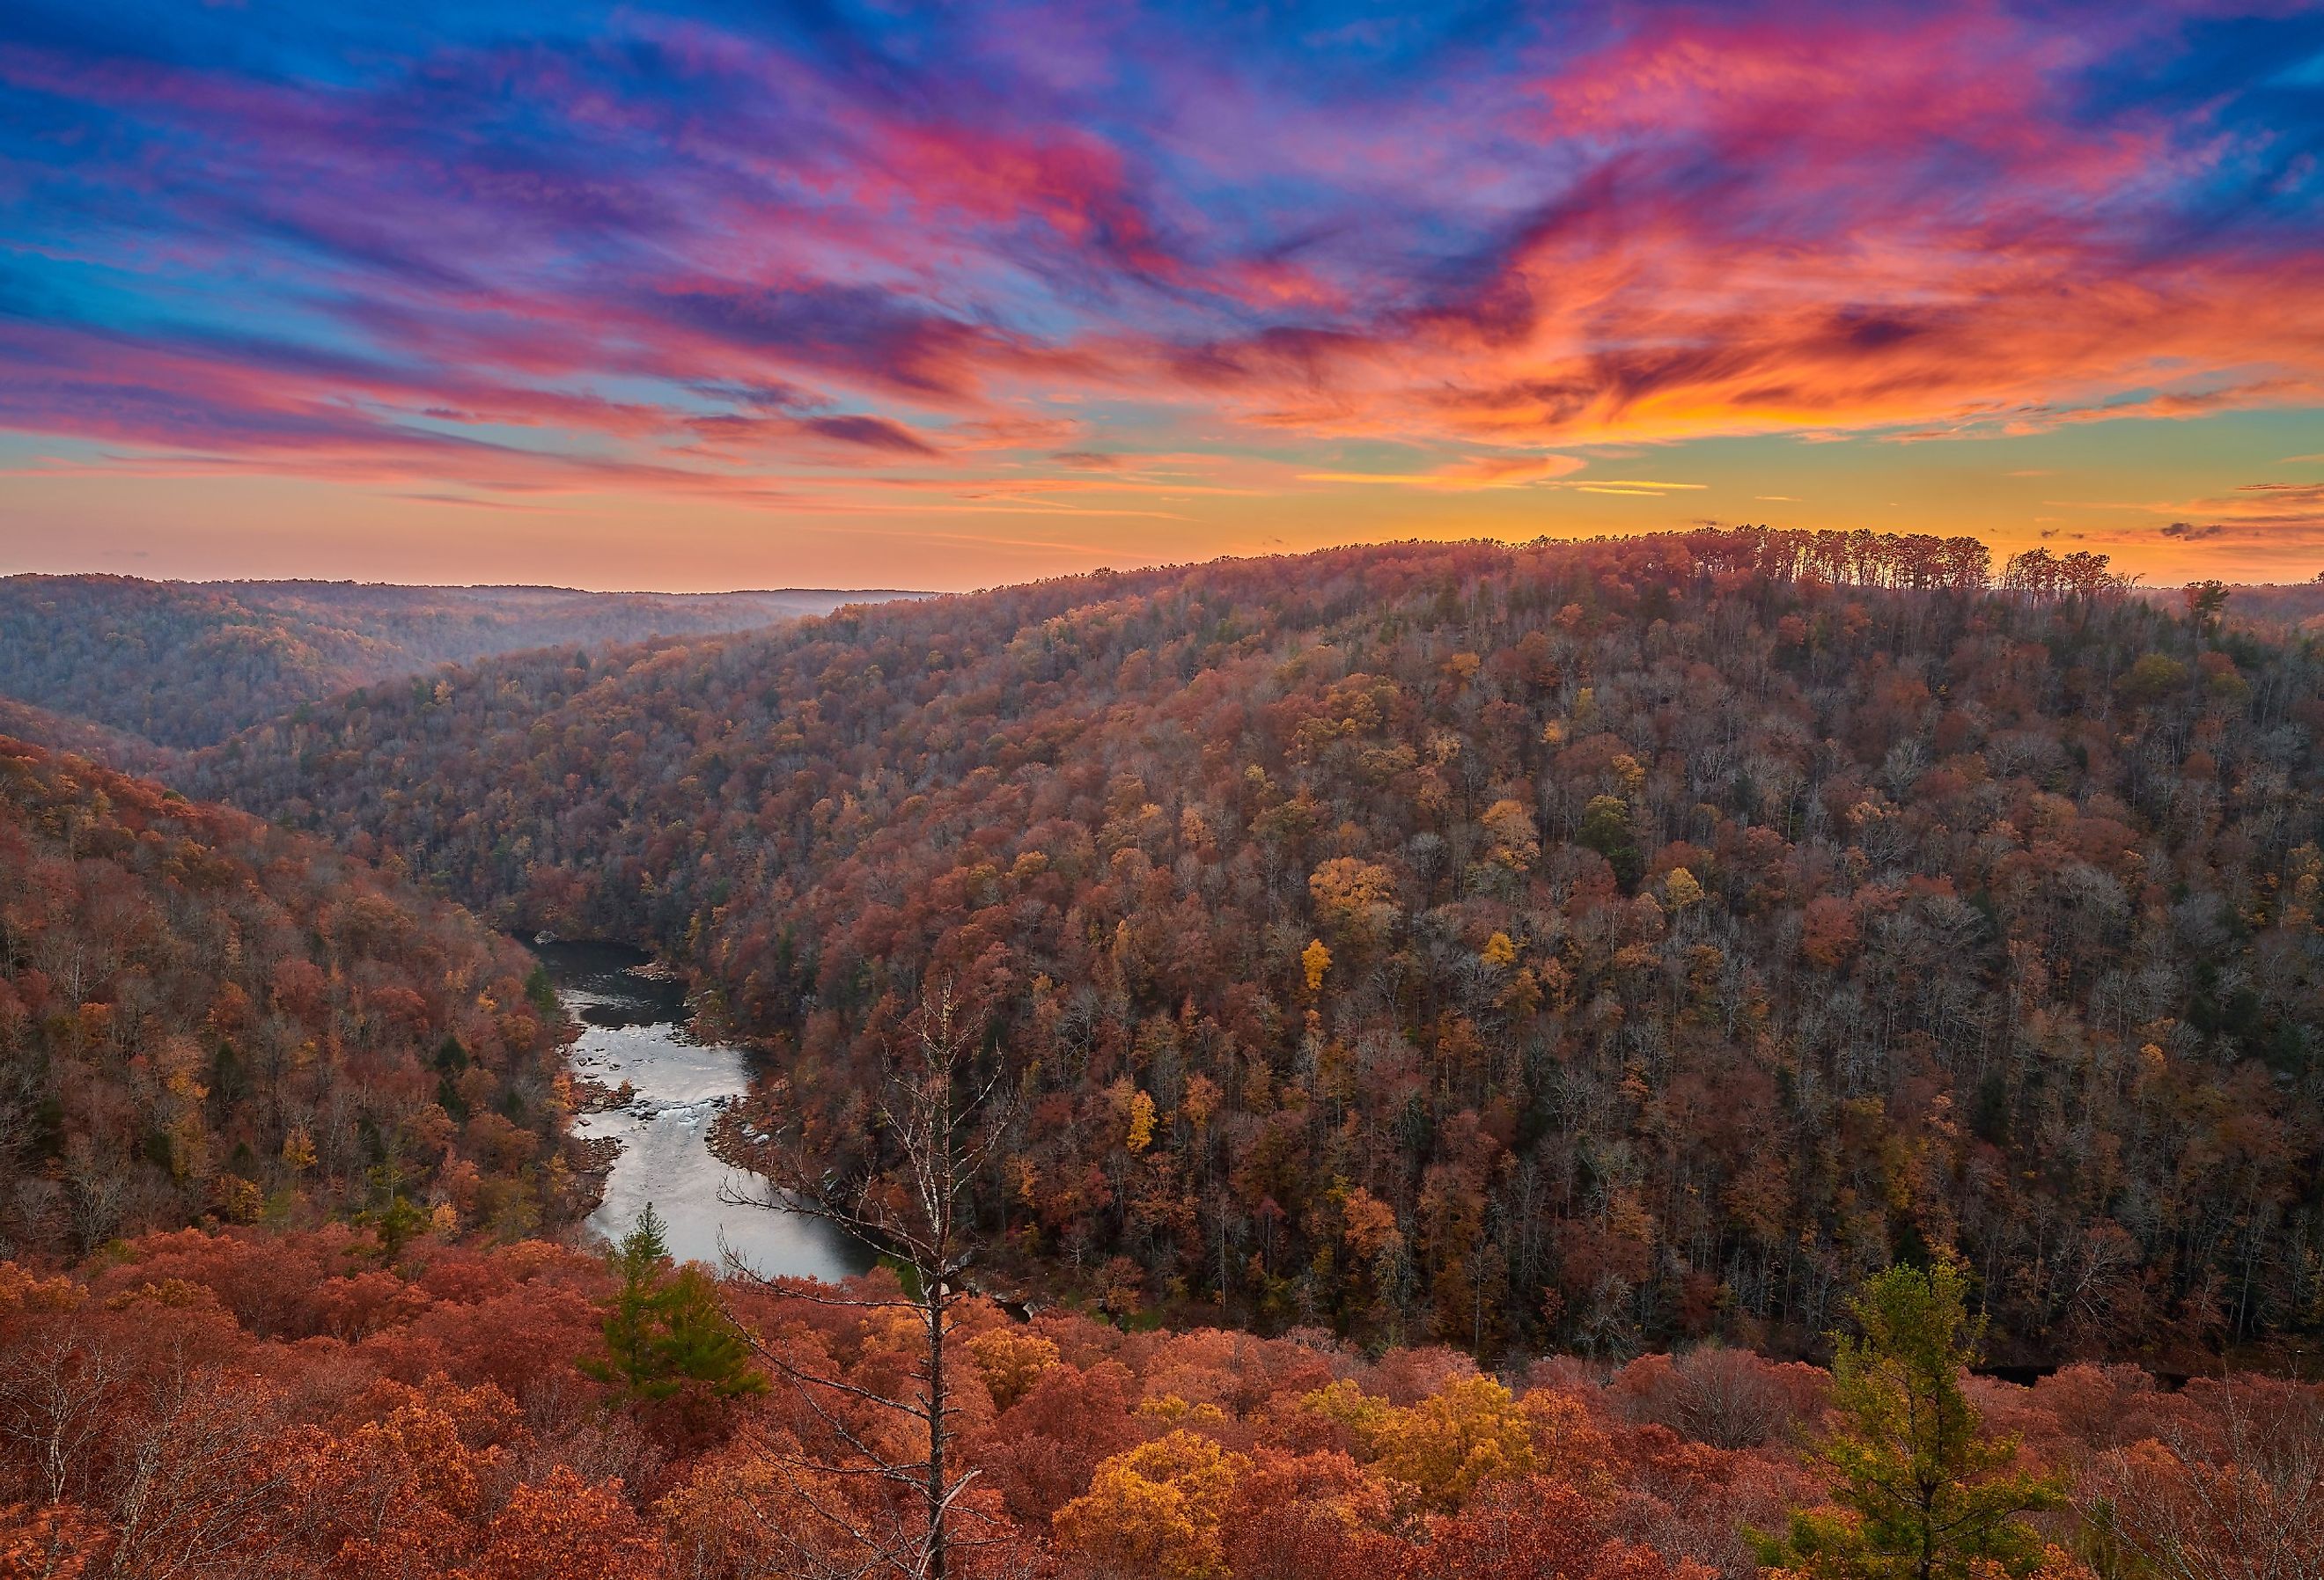 Autumn colors at East Rim Overlook Big South Fork National River and Recreation Area, Tennessee.